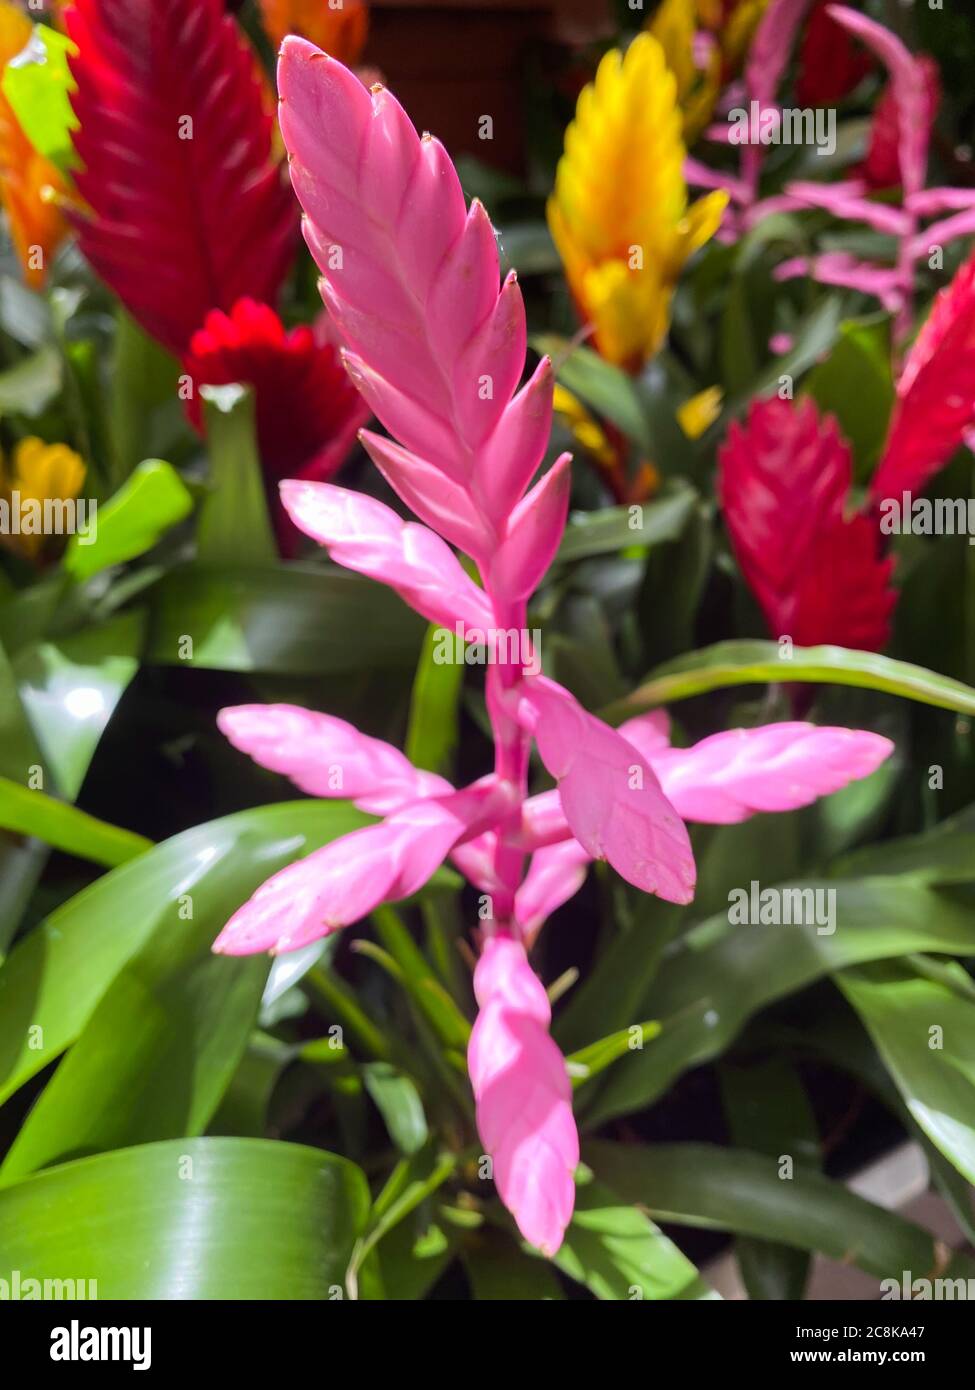 Closeup of isolated tropical plant (vriesea cultivar) with shiny pink blossom and green leaves Stock Photo